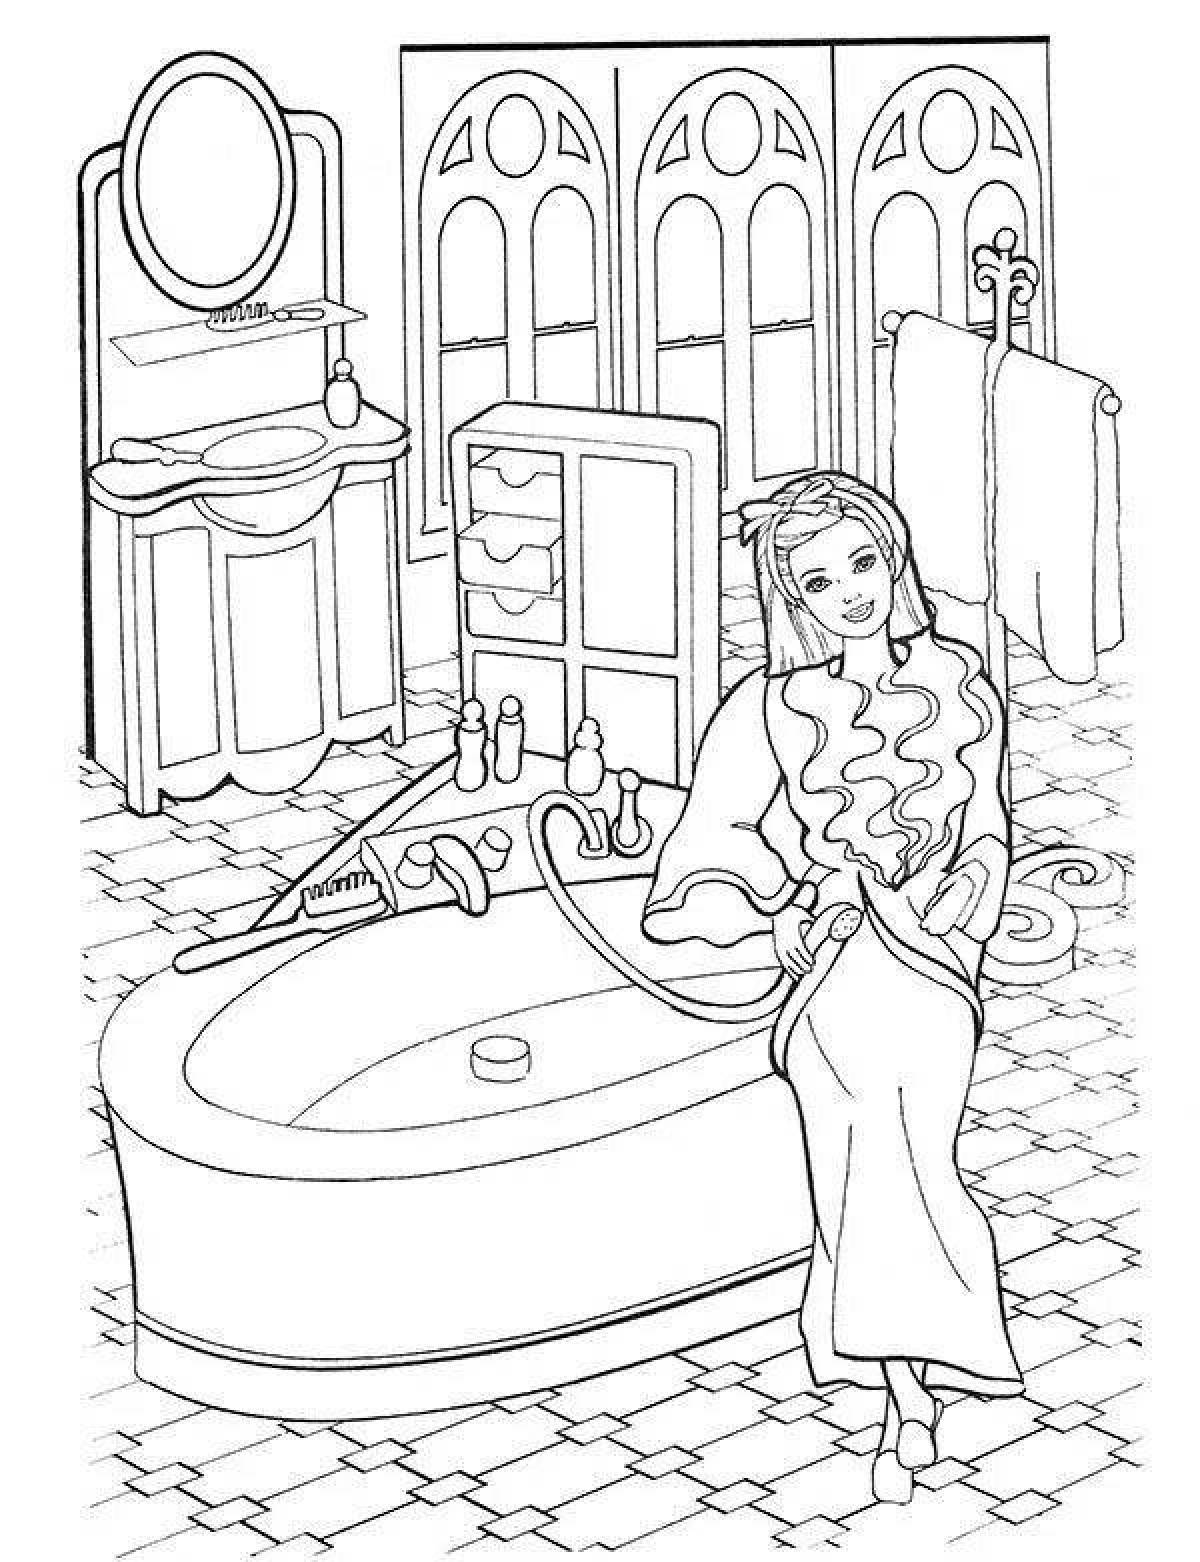 Coloring page charming barbie house